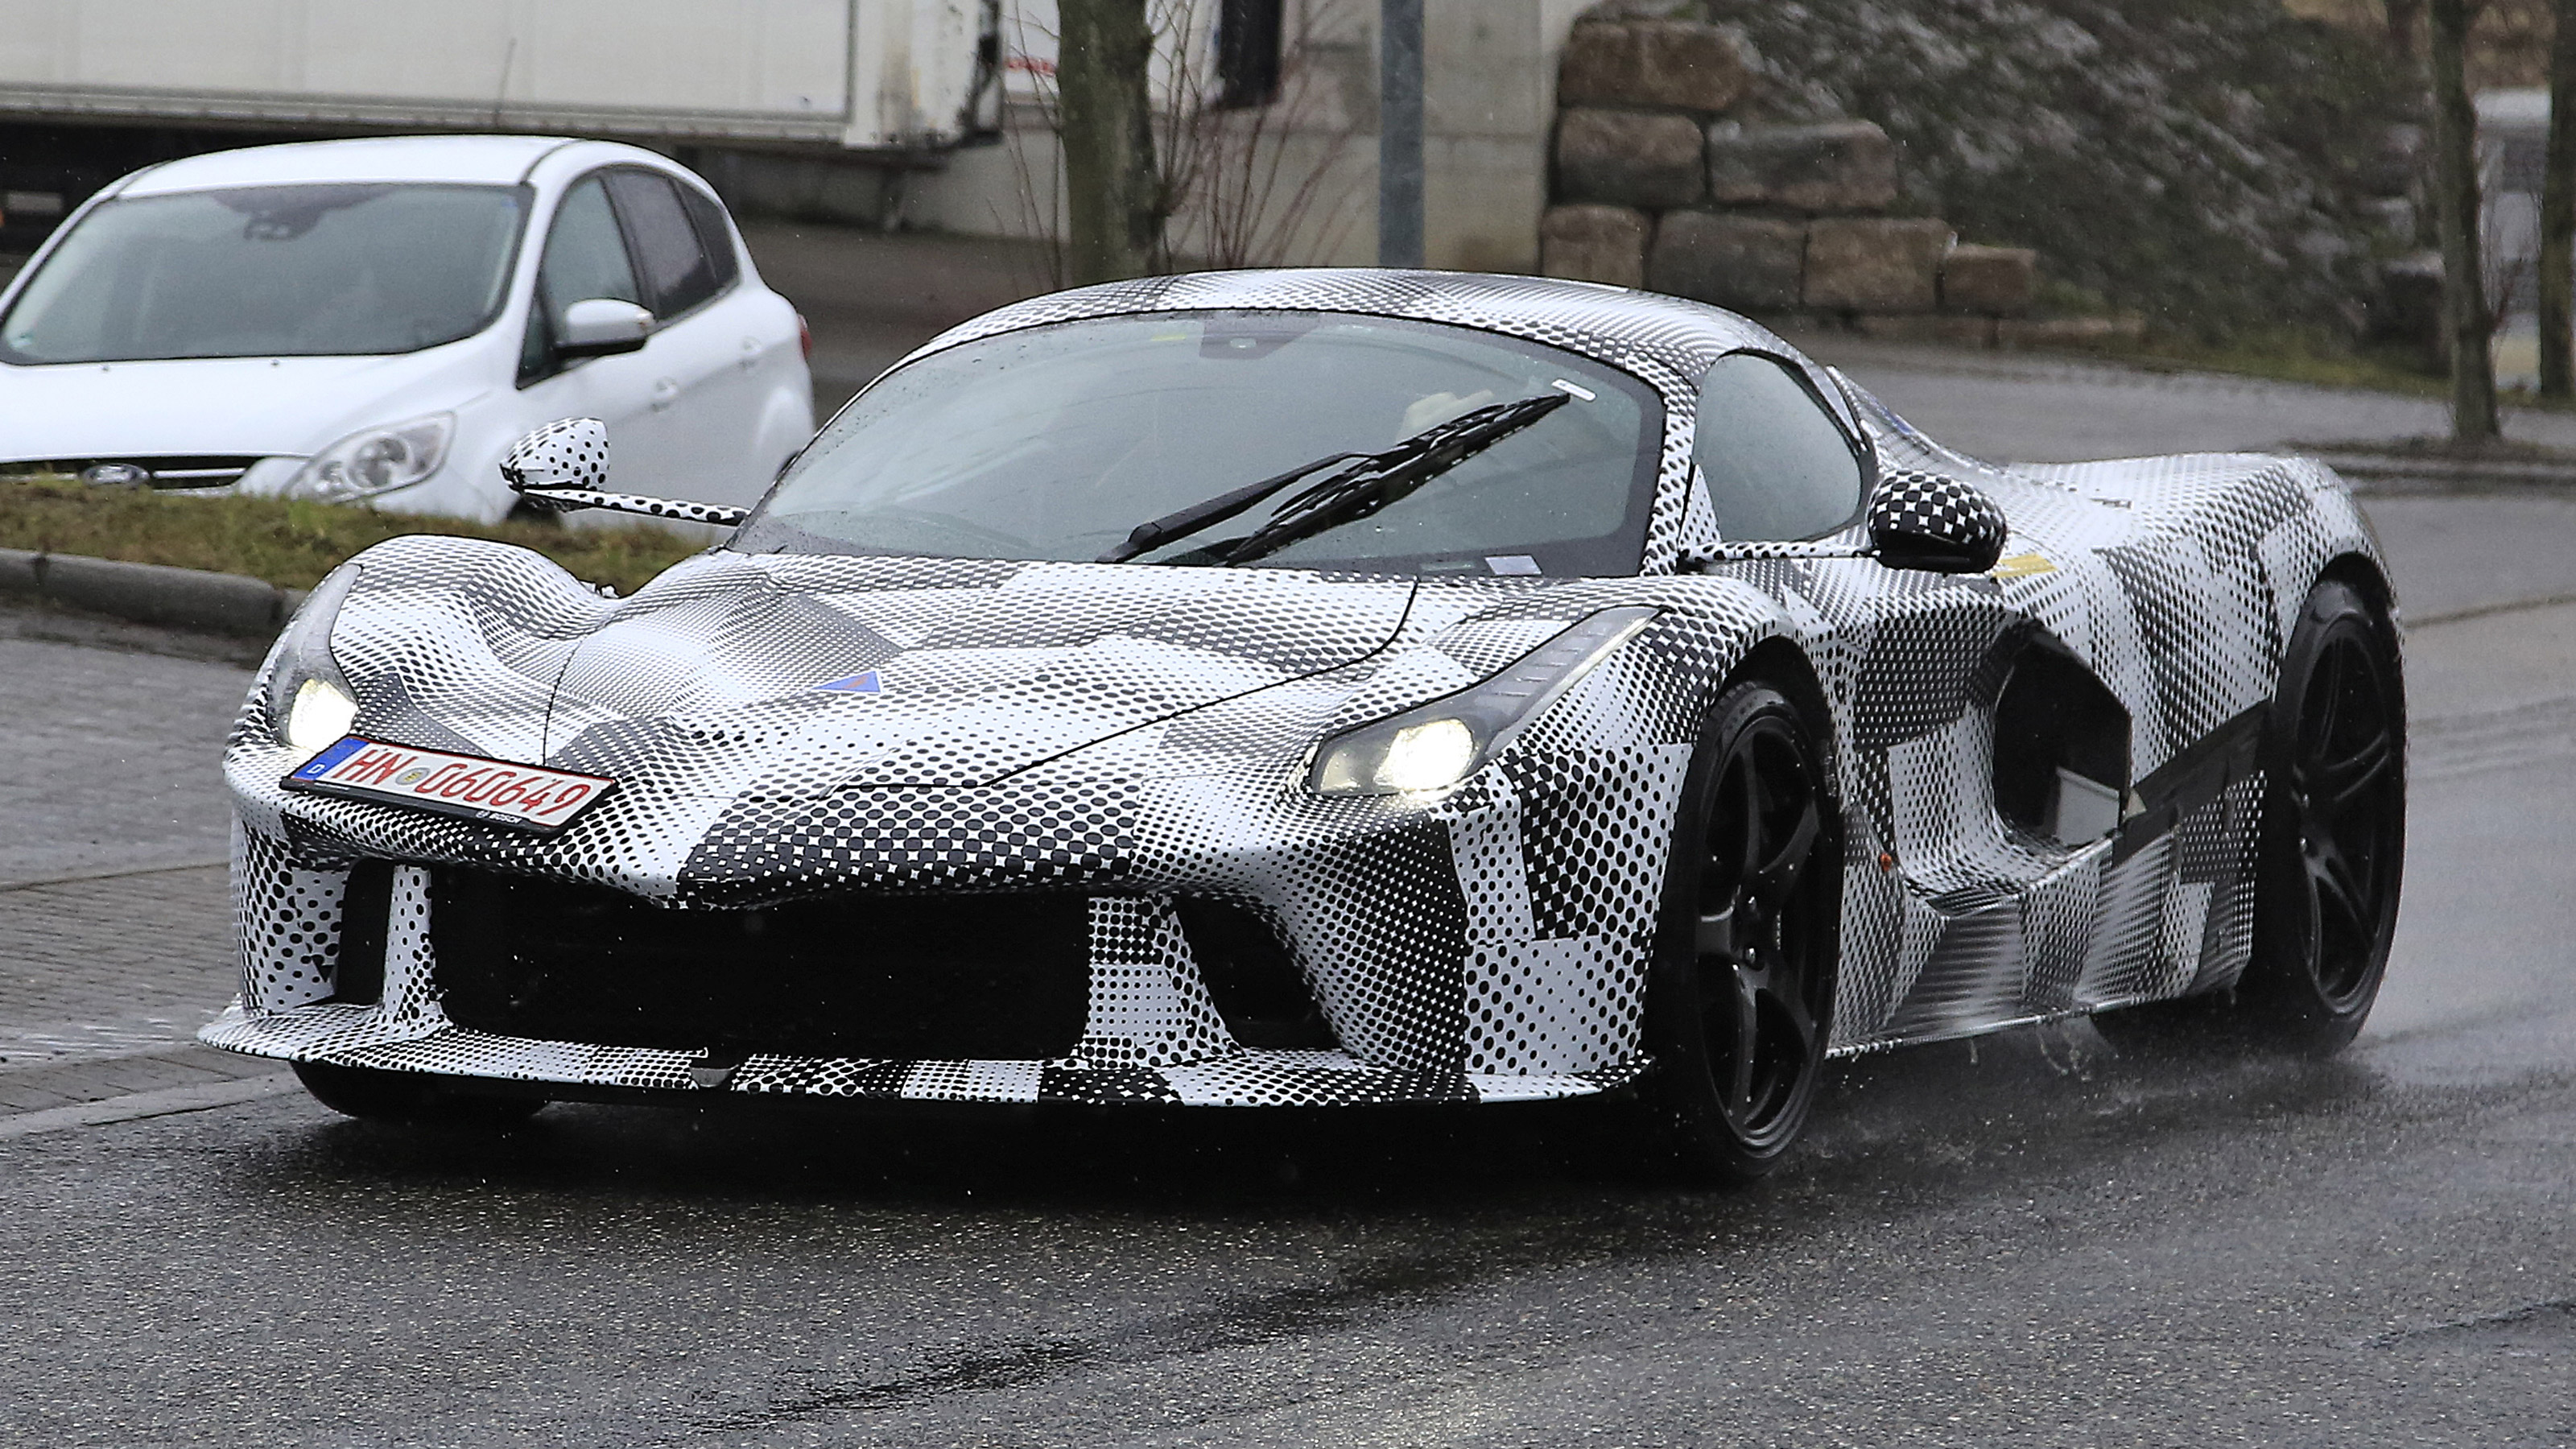 New 2023 Ferrari Hypercar spied for the first time - Automotive Daily